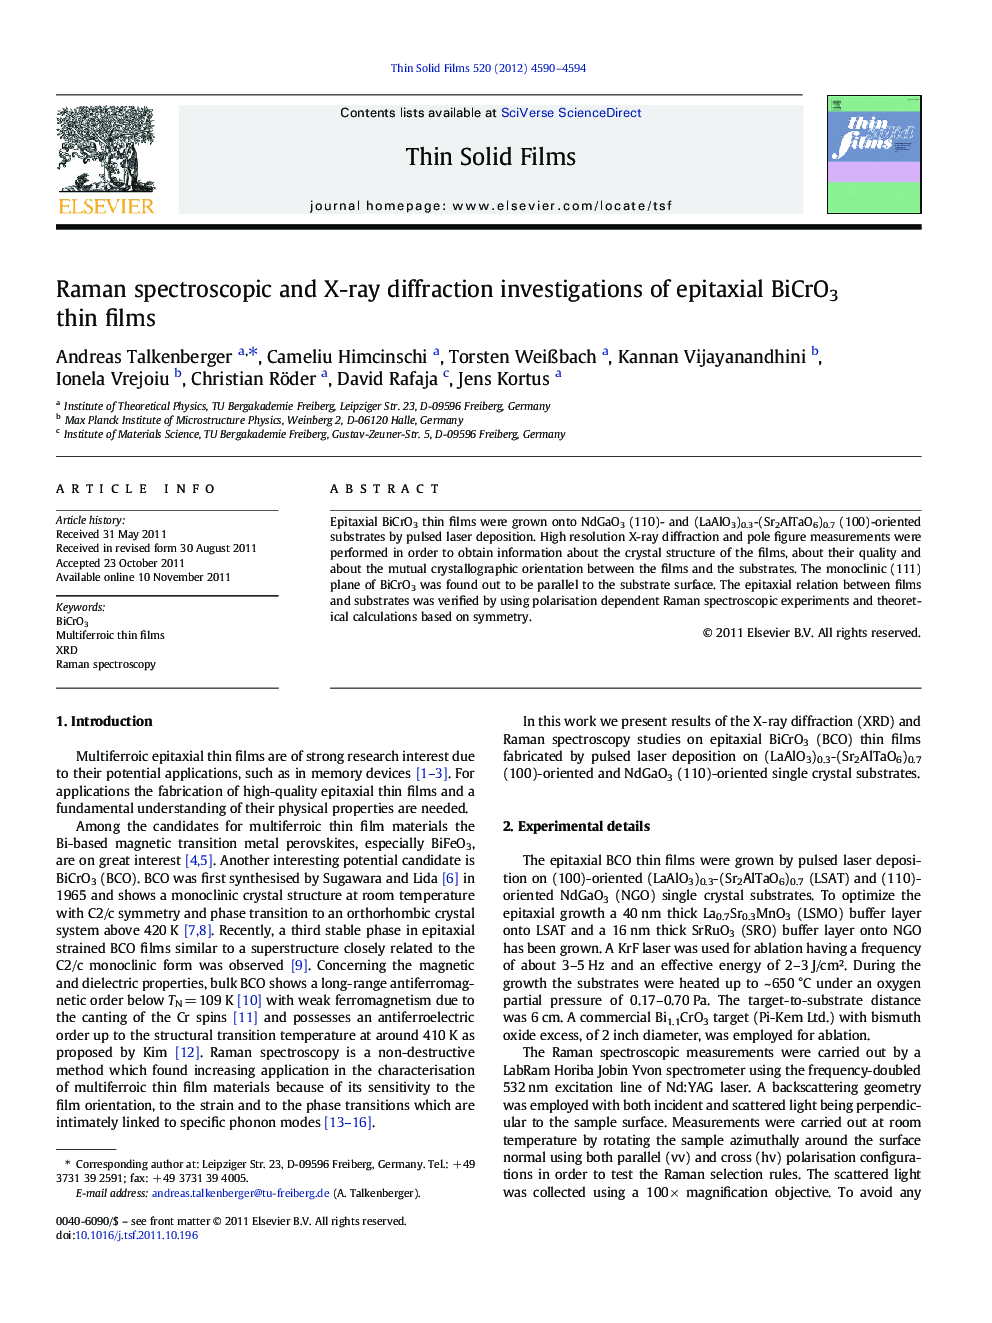 Raman spectroscopic and X-ray diffraction investigations of epitaxial BiCrO3 thin films